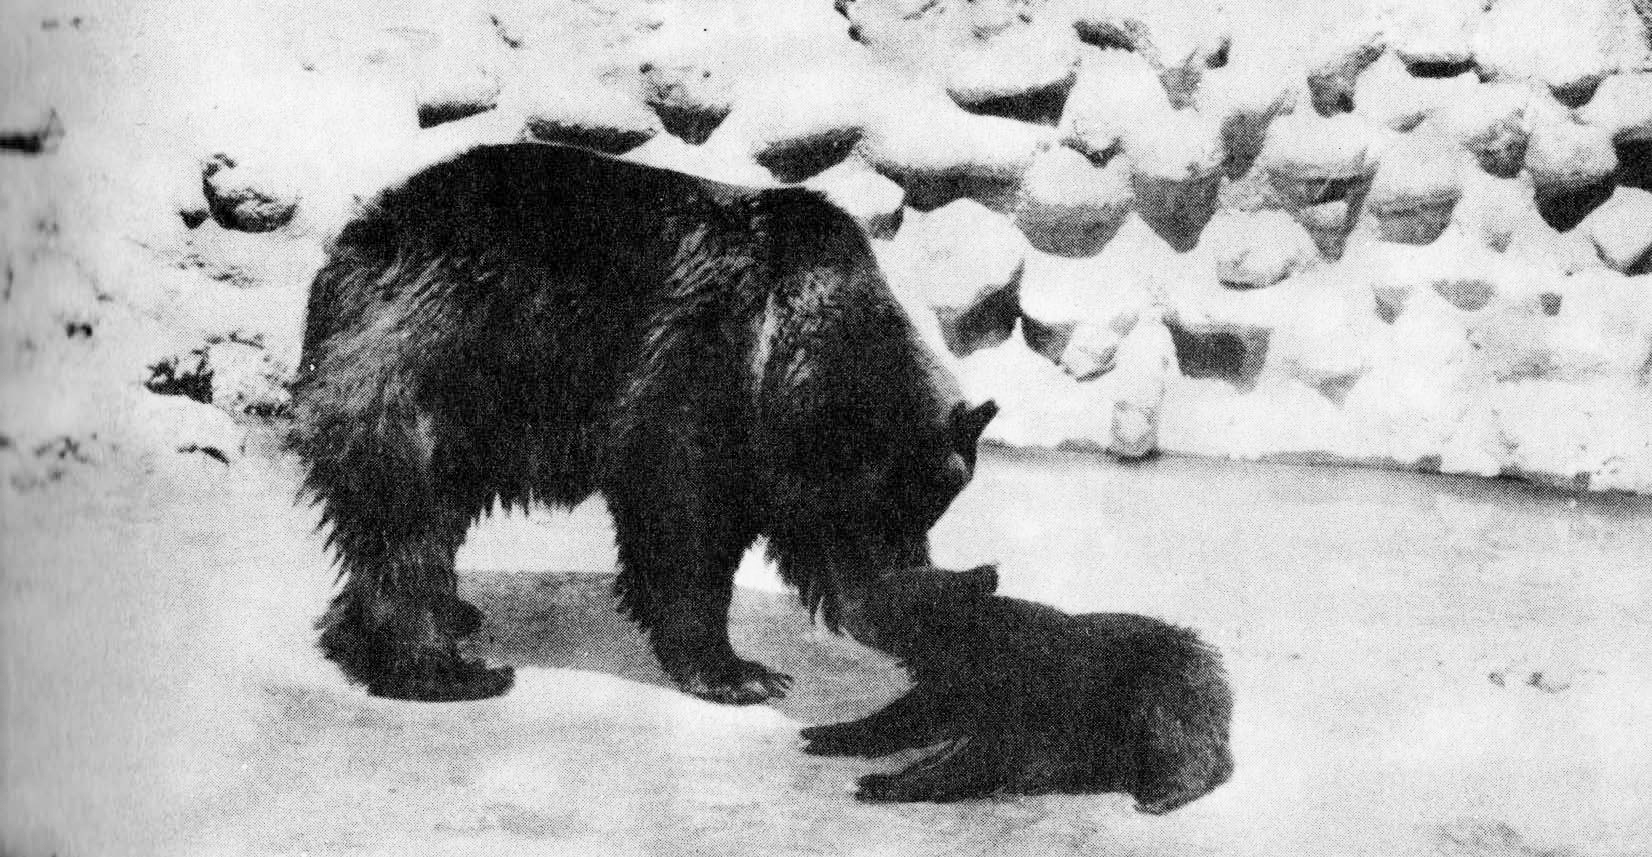 Babe and Lottie, grizzly bears